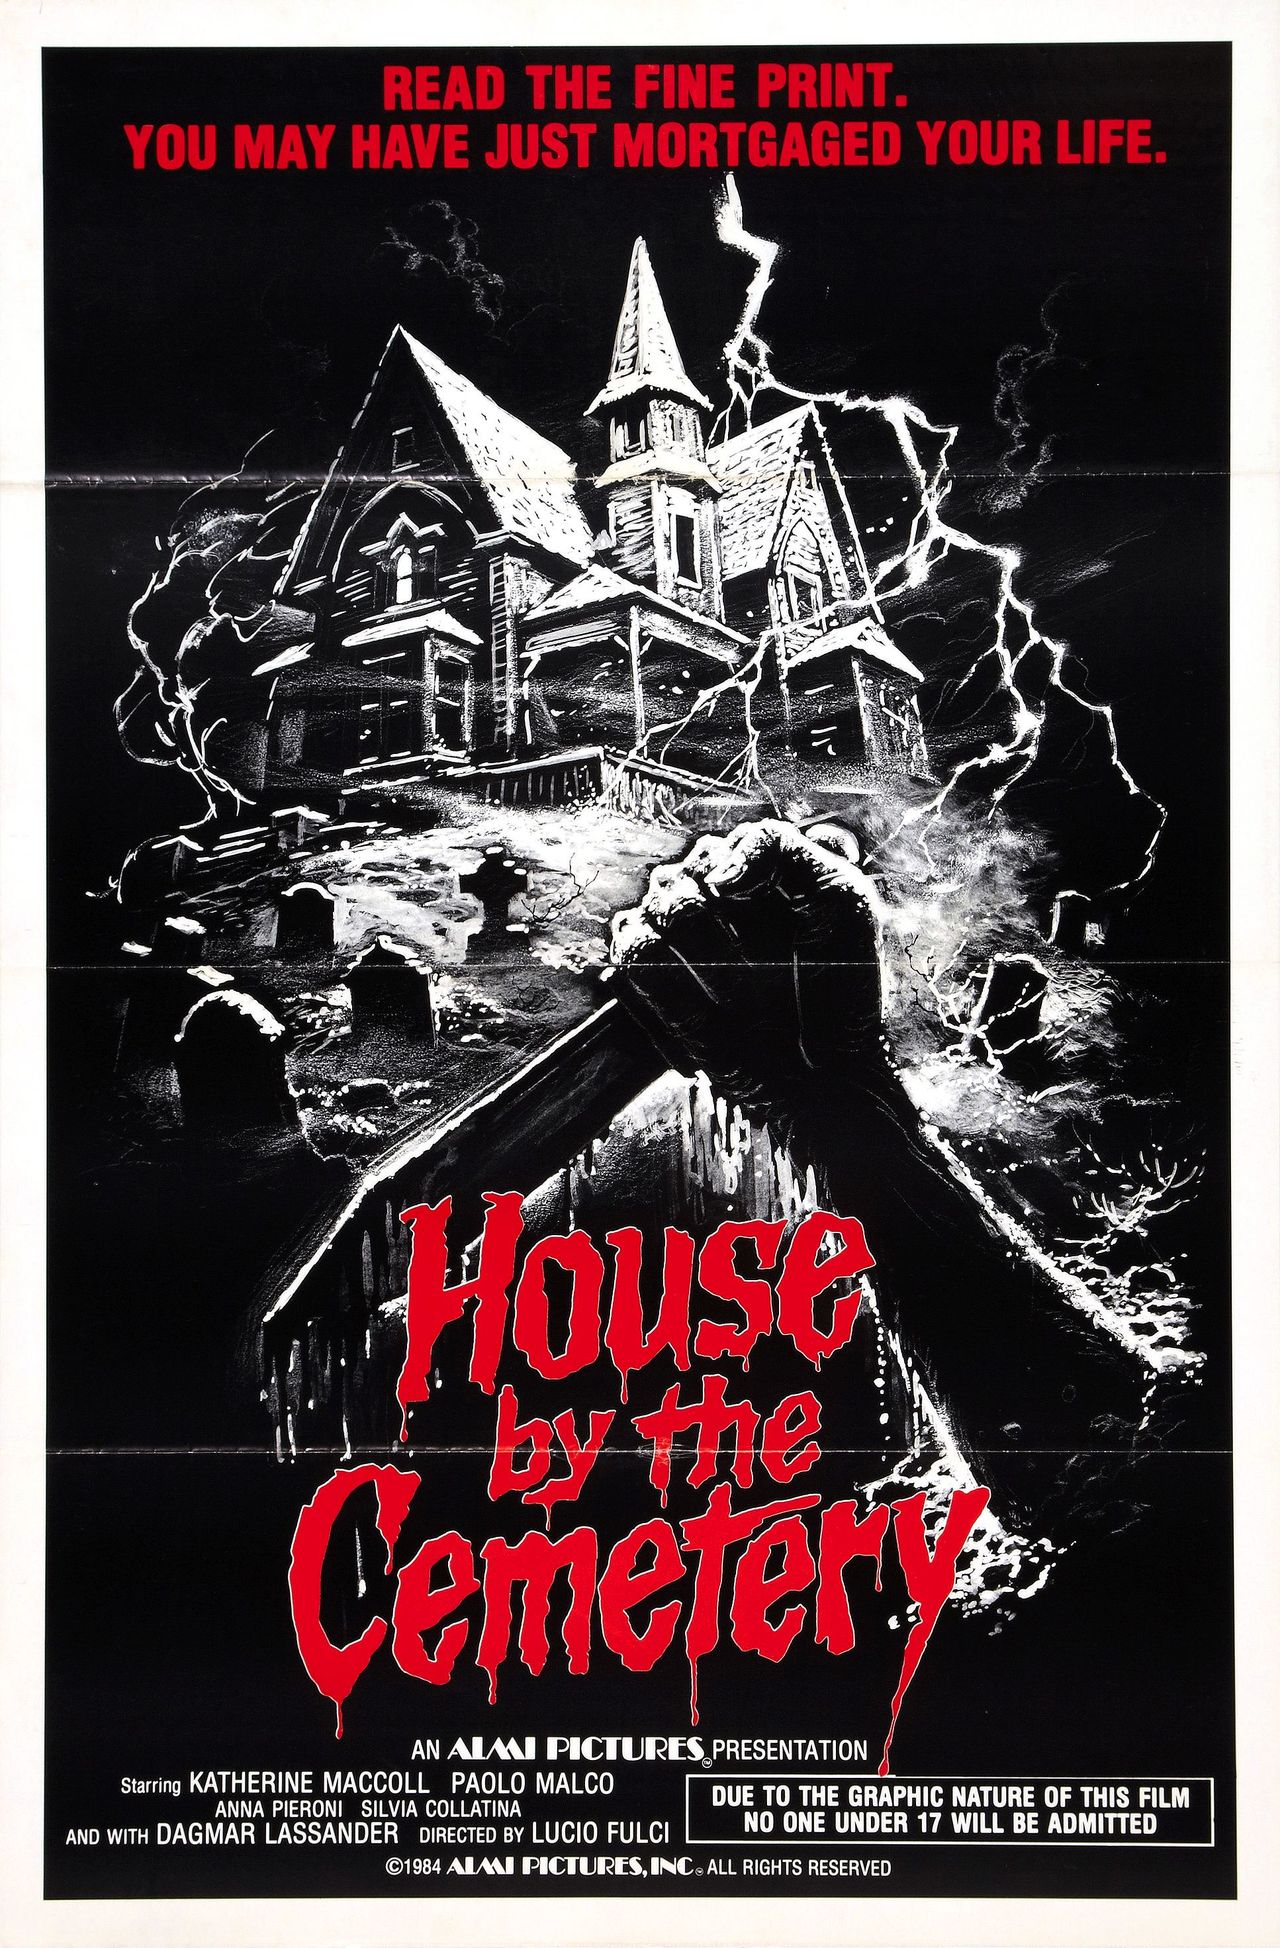 THE HOUSE BY THE CEMETERY (1981)